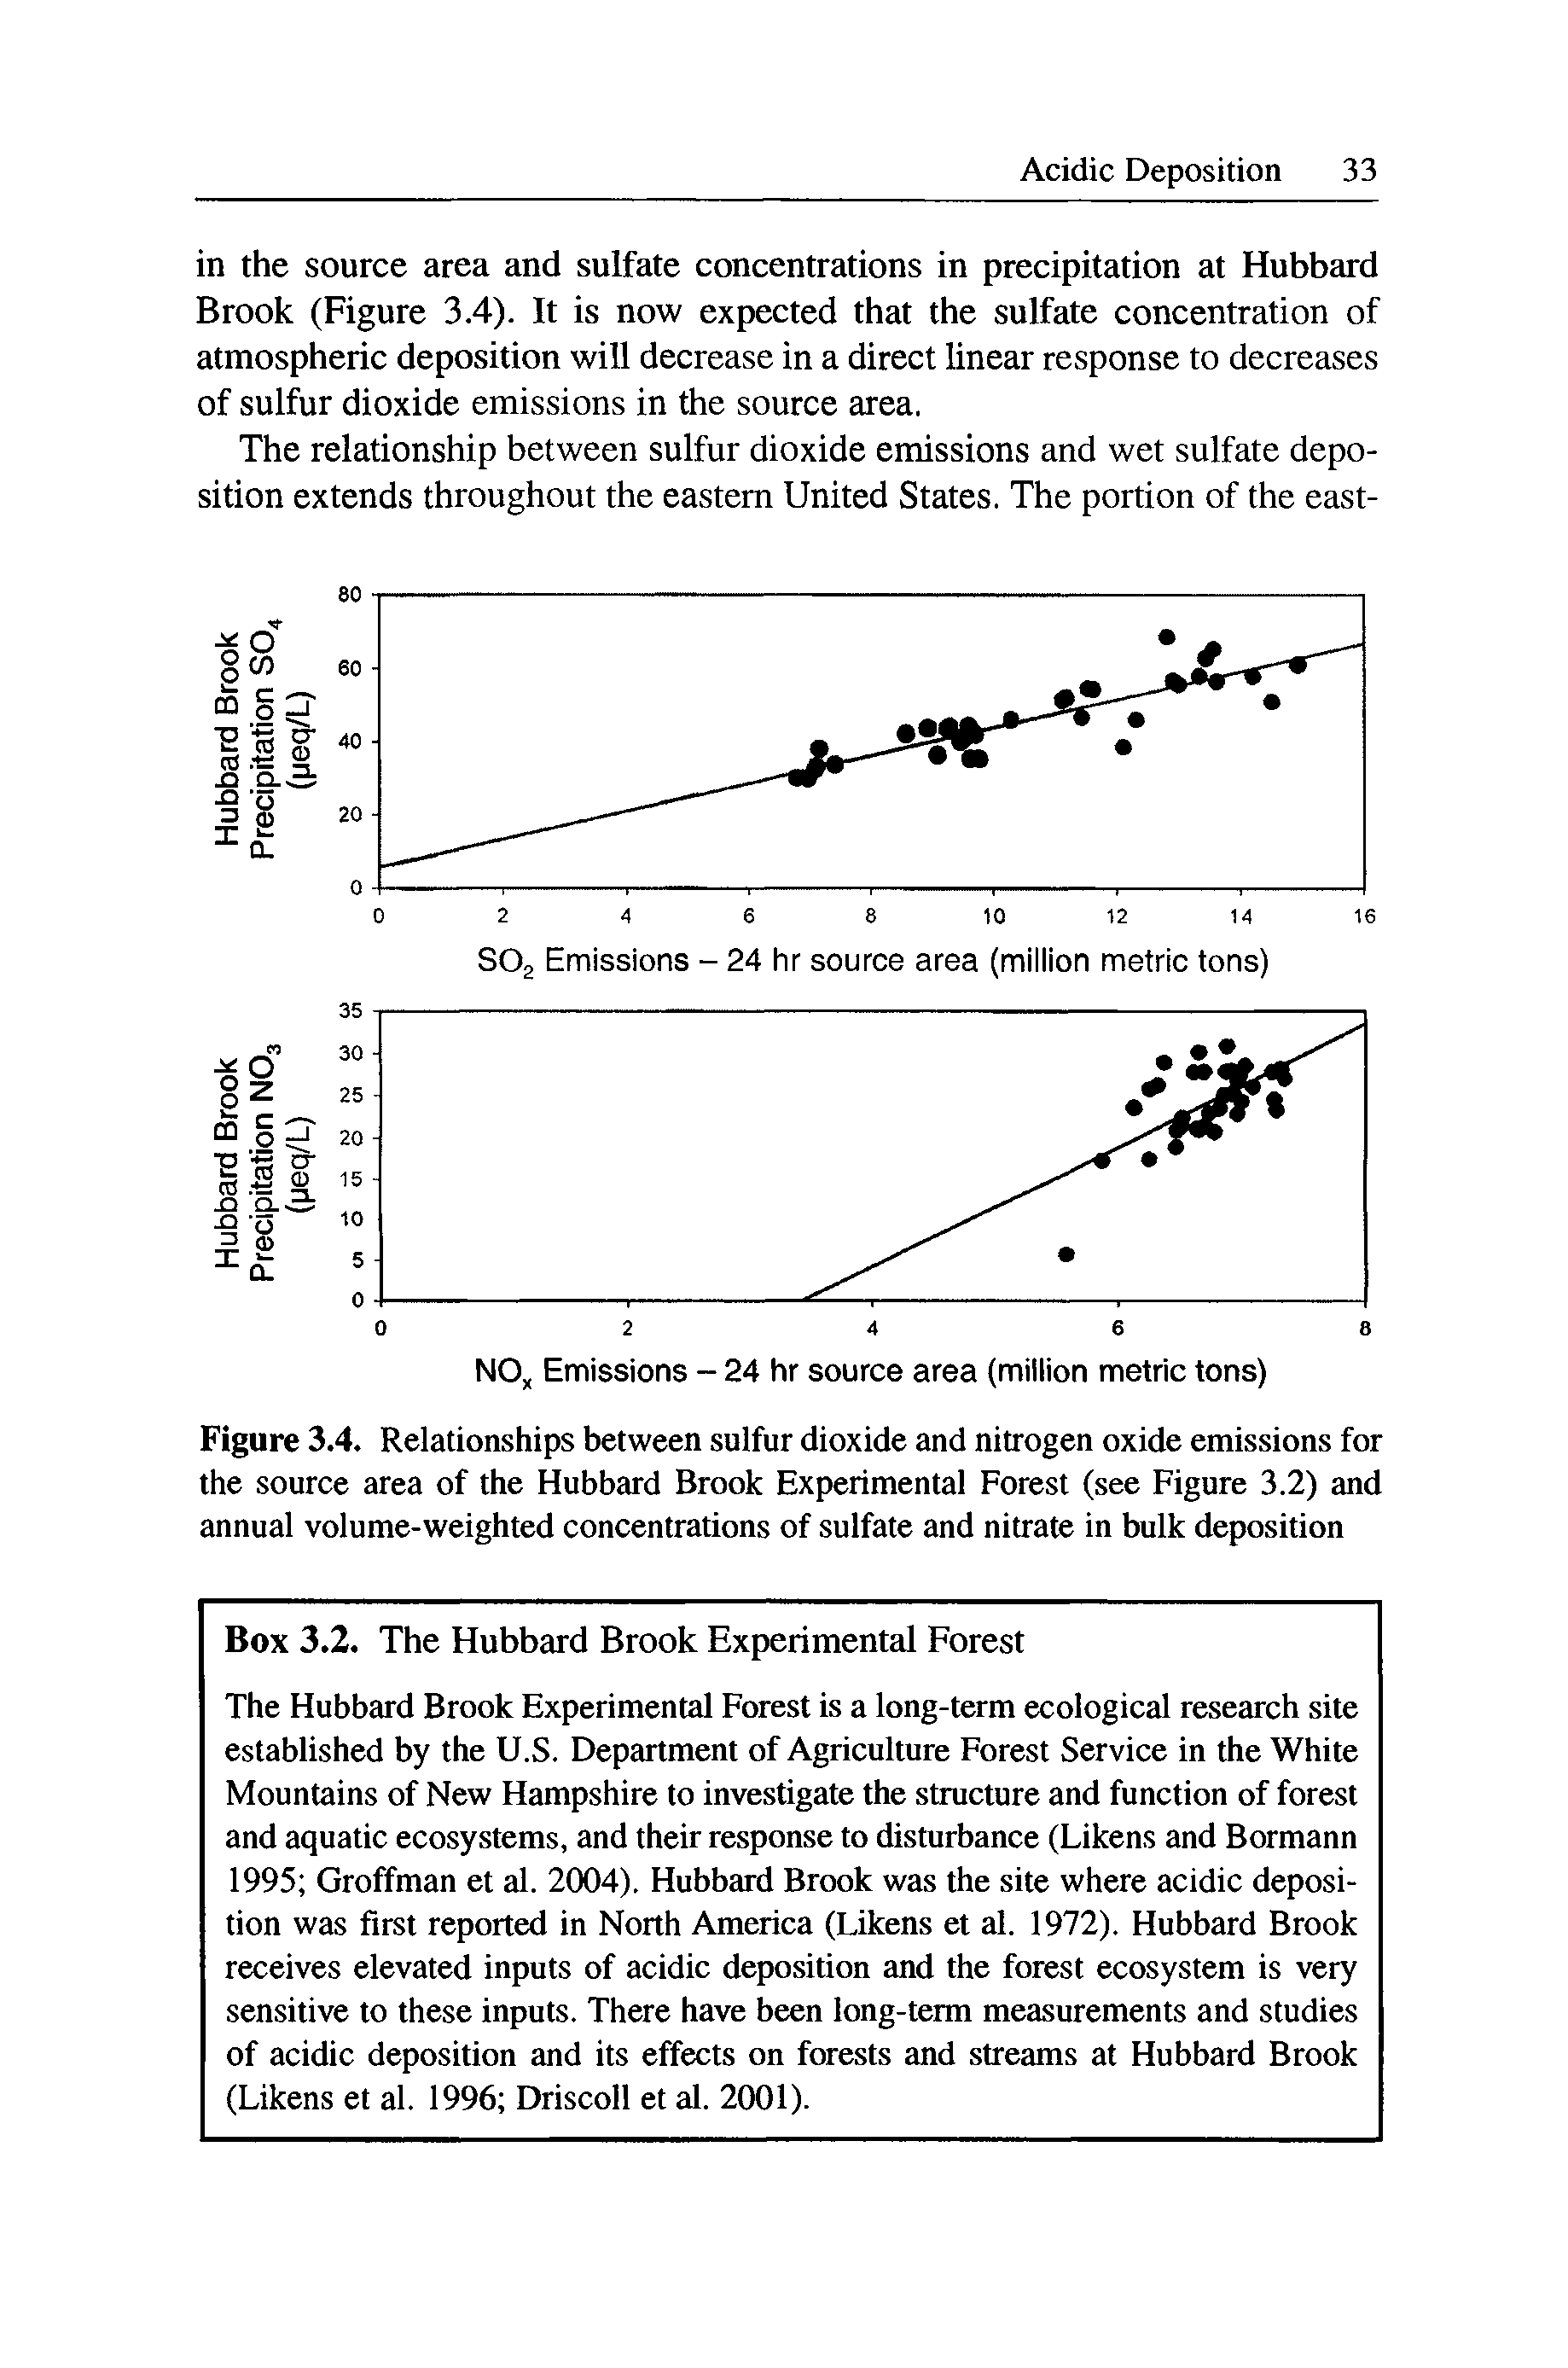 Figure 3.4. Relationships between sulfur dioxide and nitrogen oxide emissions for the source area of the Hubbard Brook Experimental Forest (see Figure 3.2) and annual volume-weighted concentrations of sulfate and nitrate in bulk deposition...